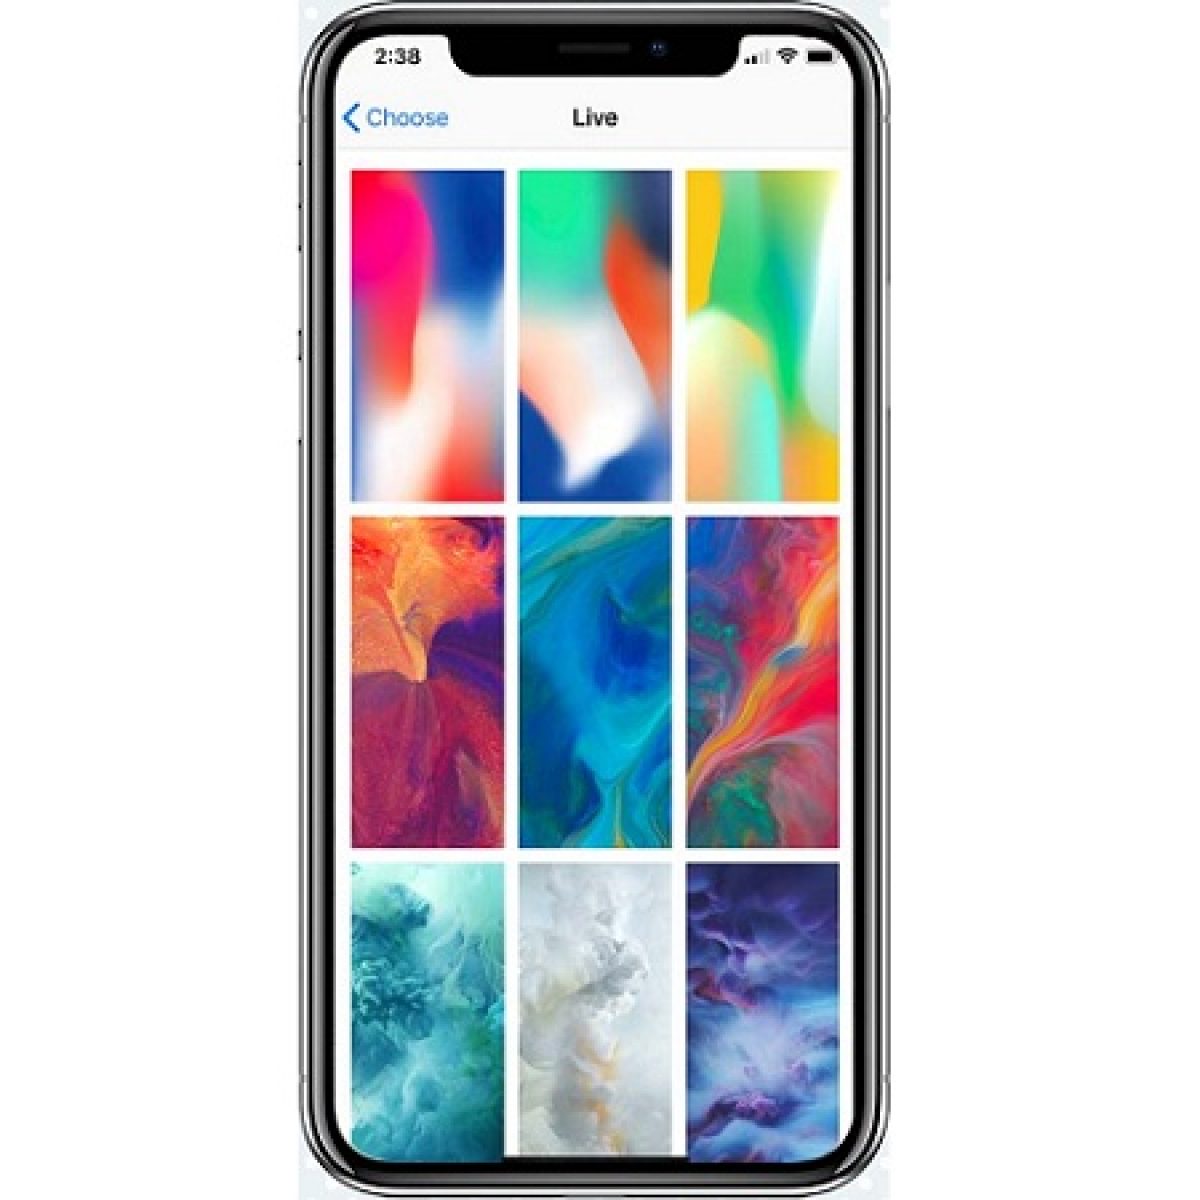 Download The 6 Exclusive iPhone X Wallpapers To Any Smartphone